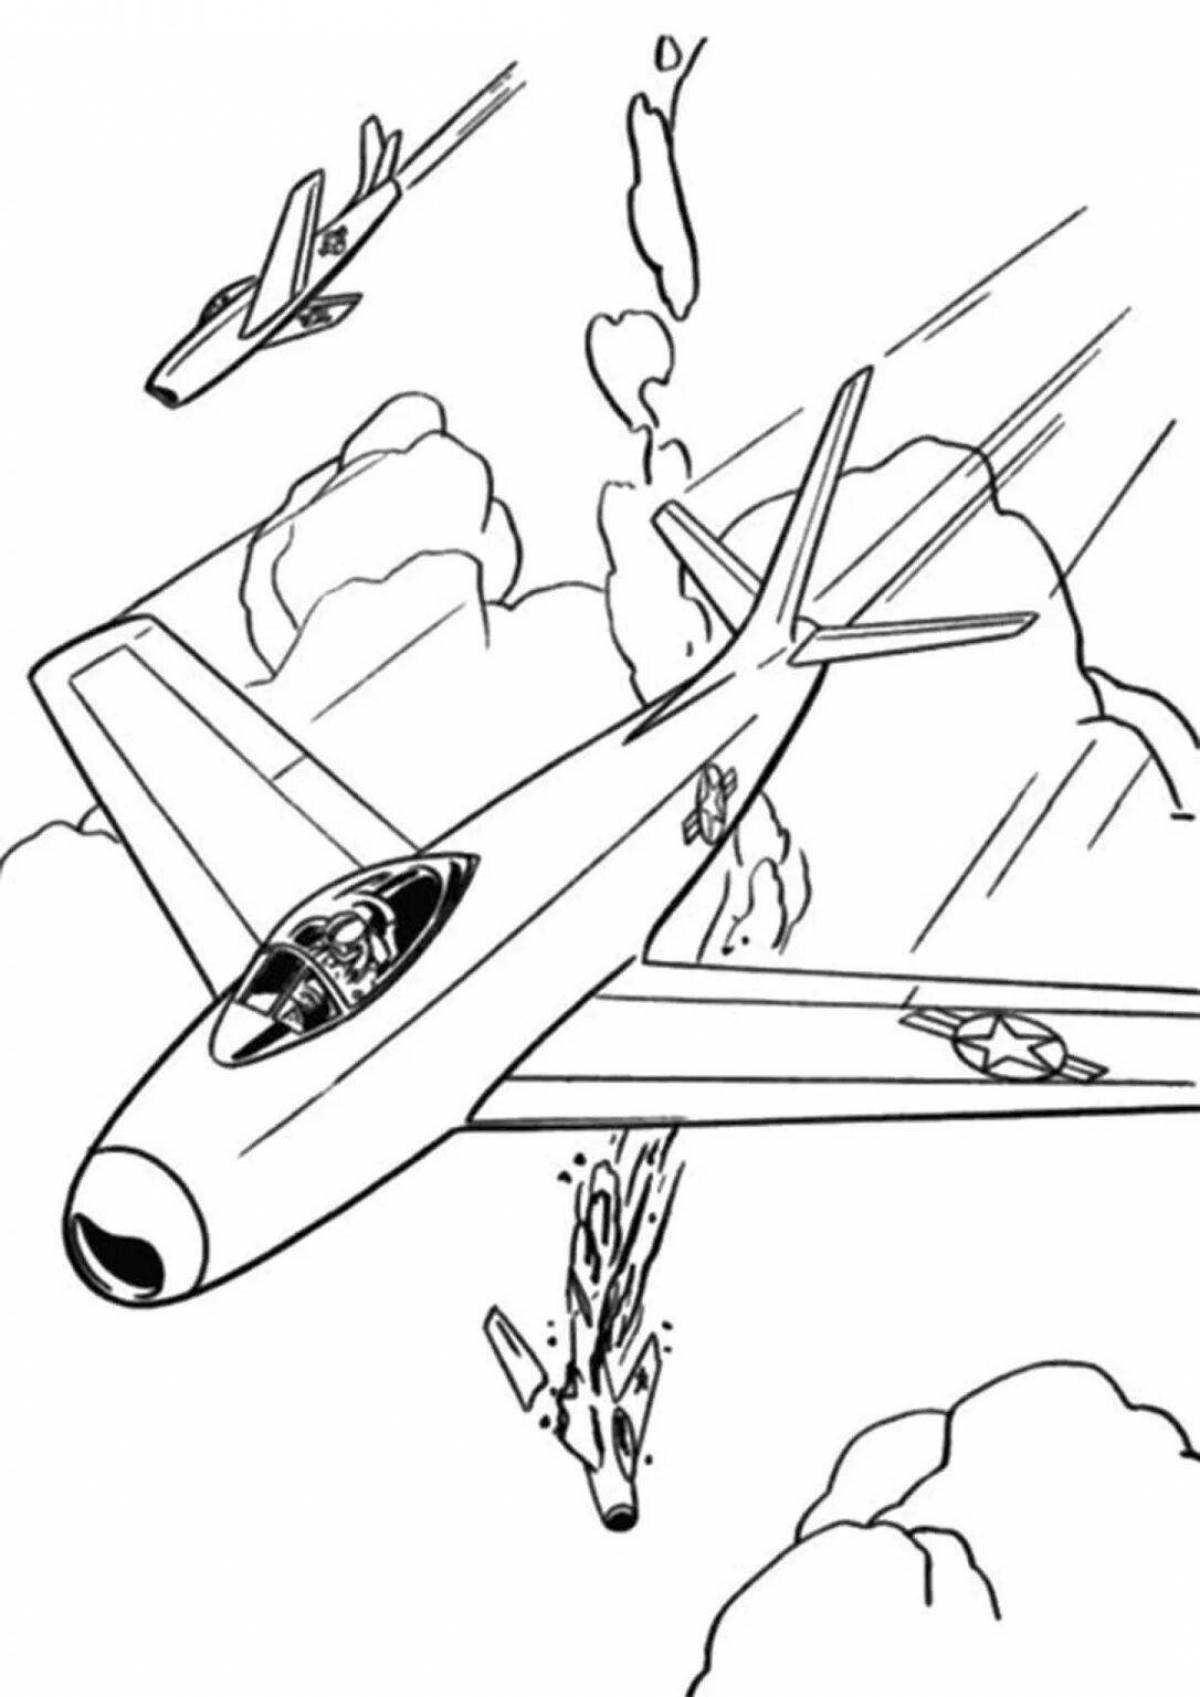 Frustrating war coloring page